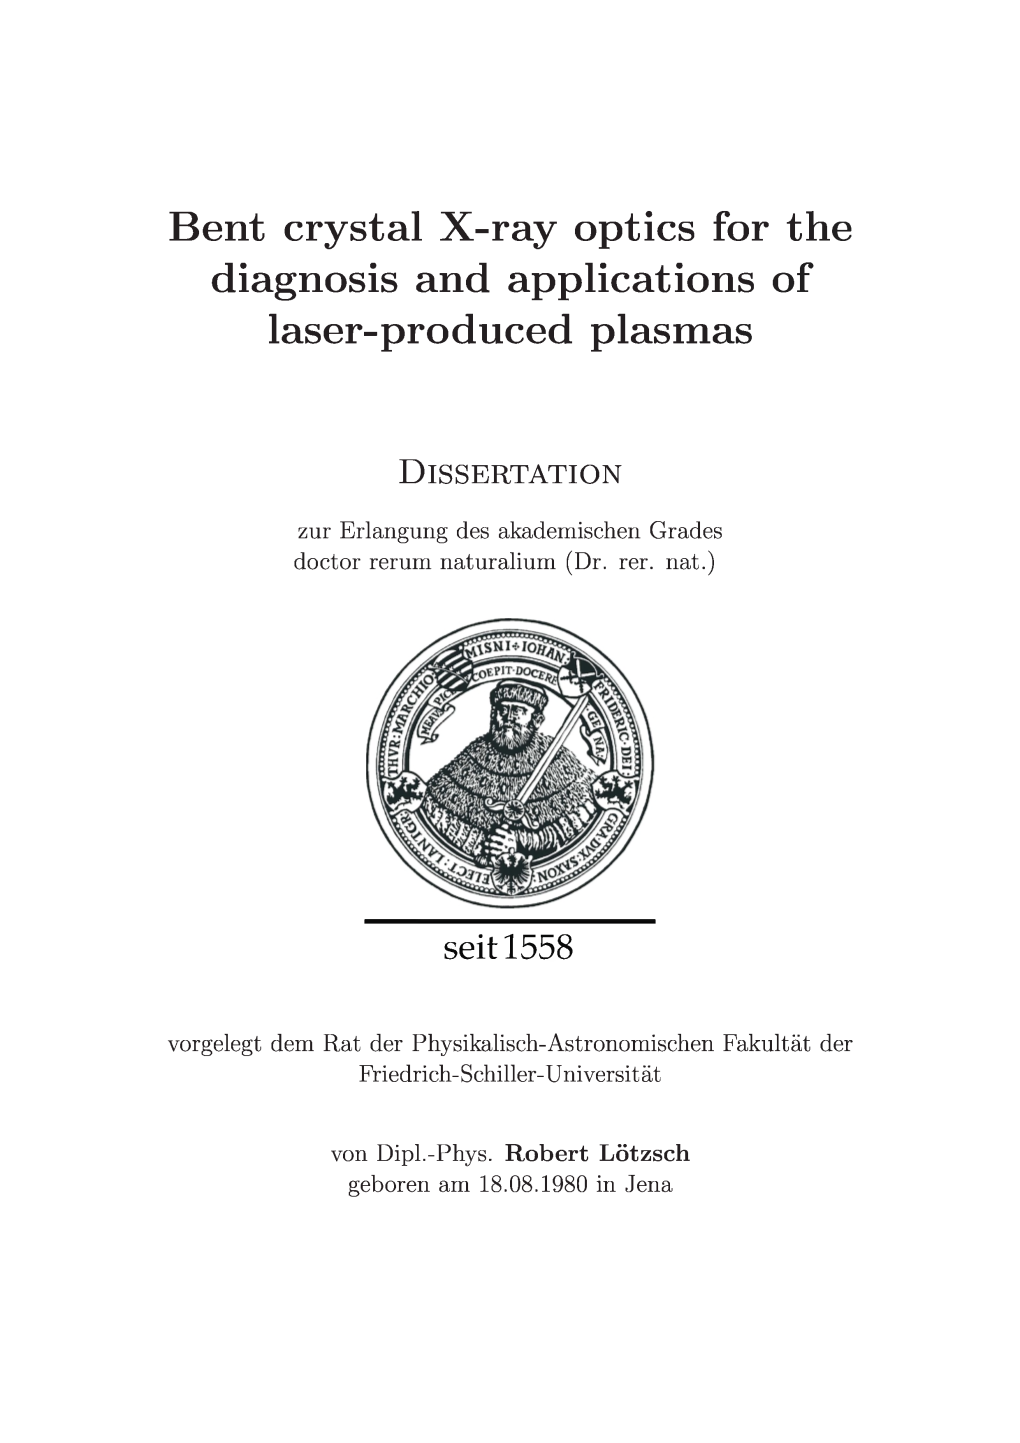 Bent Crystal X-Ray Optics for the Diagnosis and Applications of Laser-Produced Plasmas